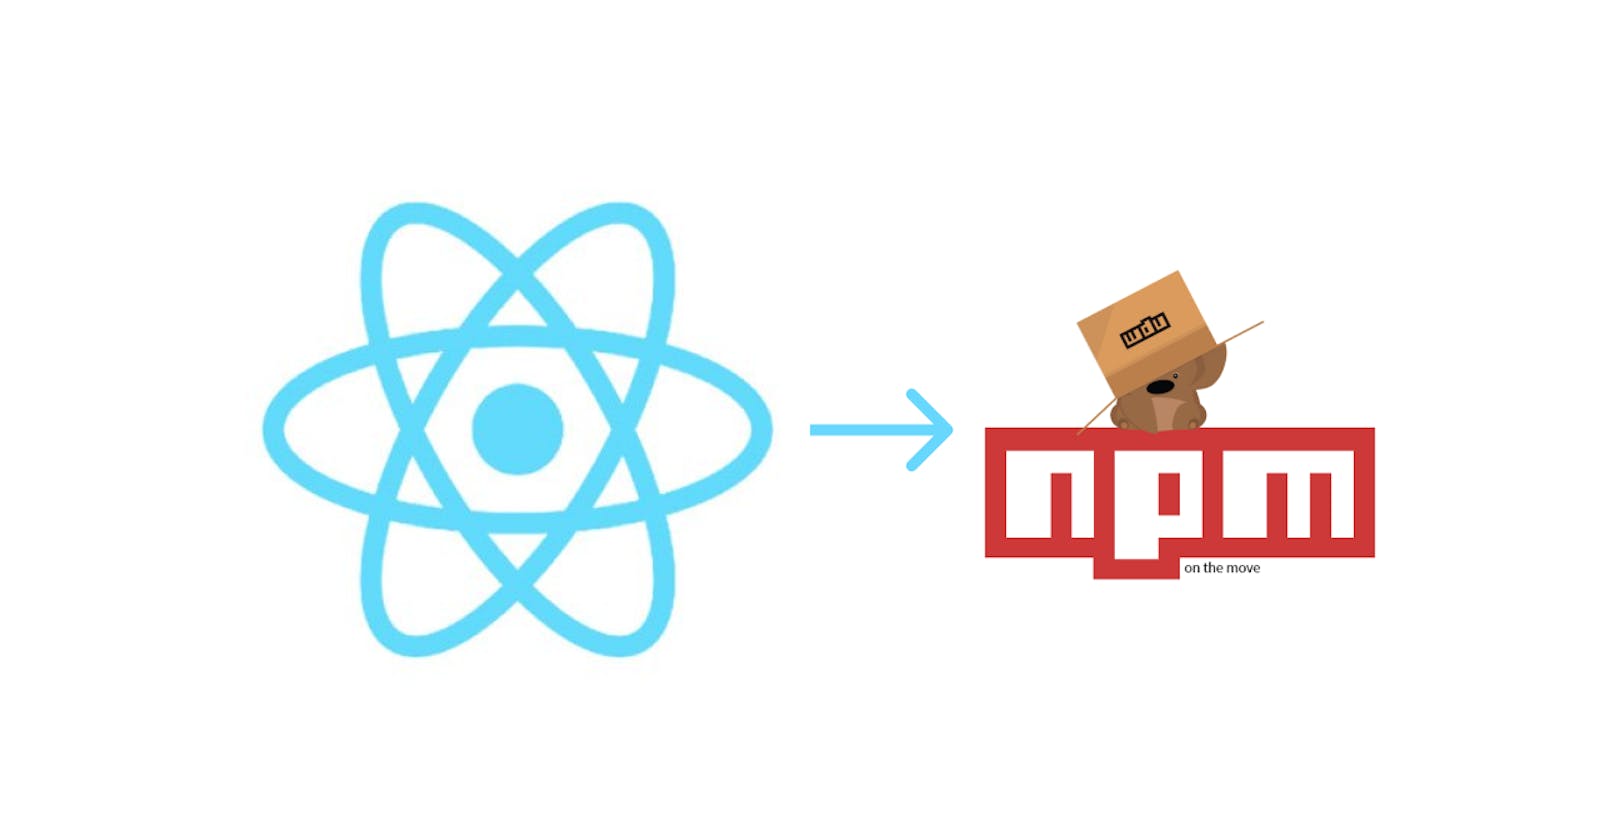 How to Publish a React Component to npm